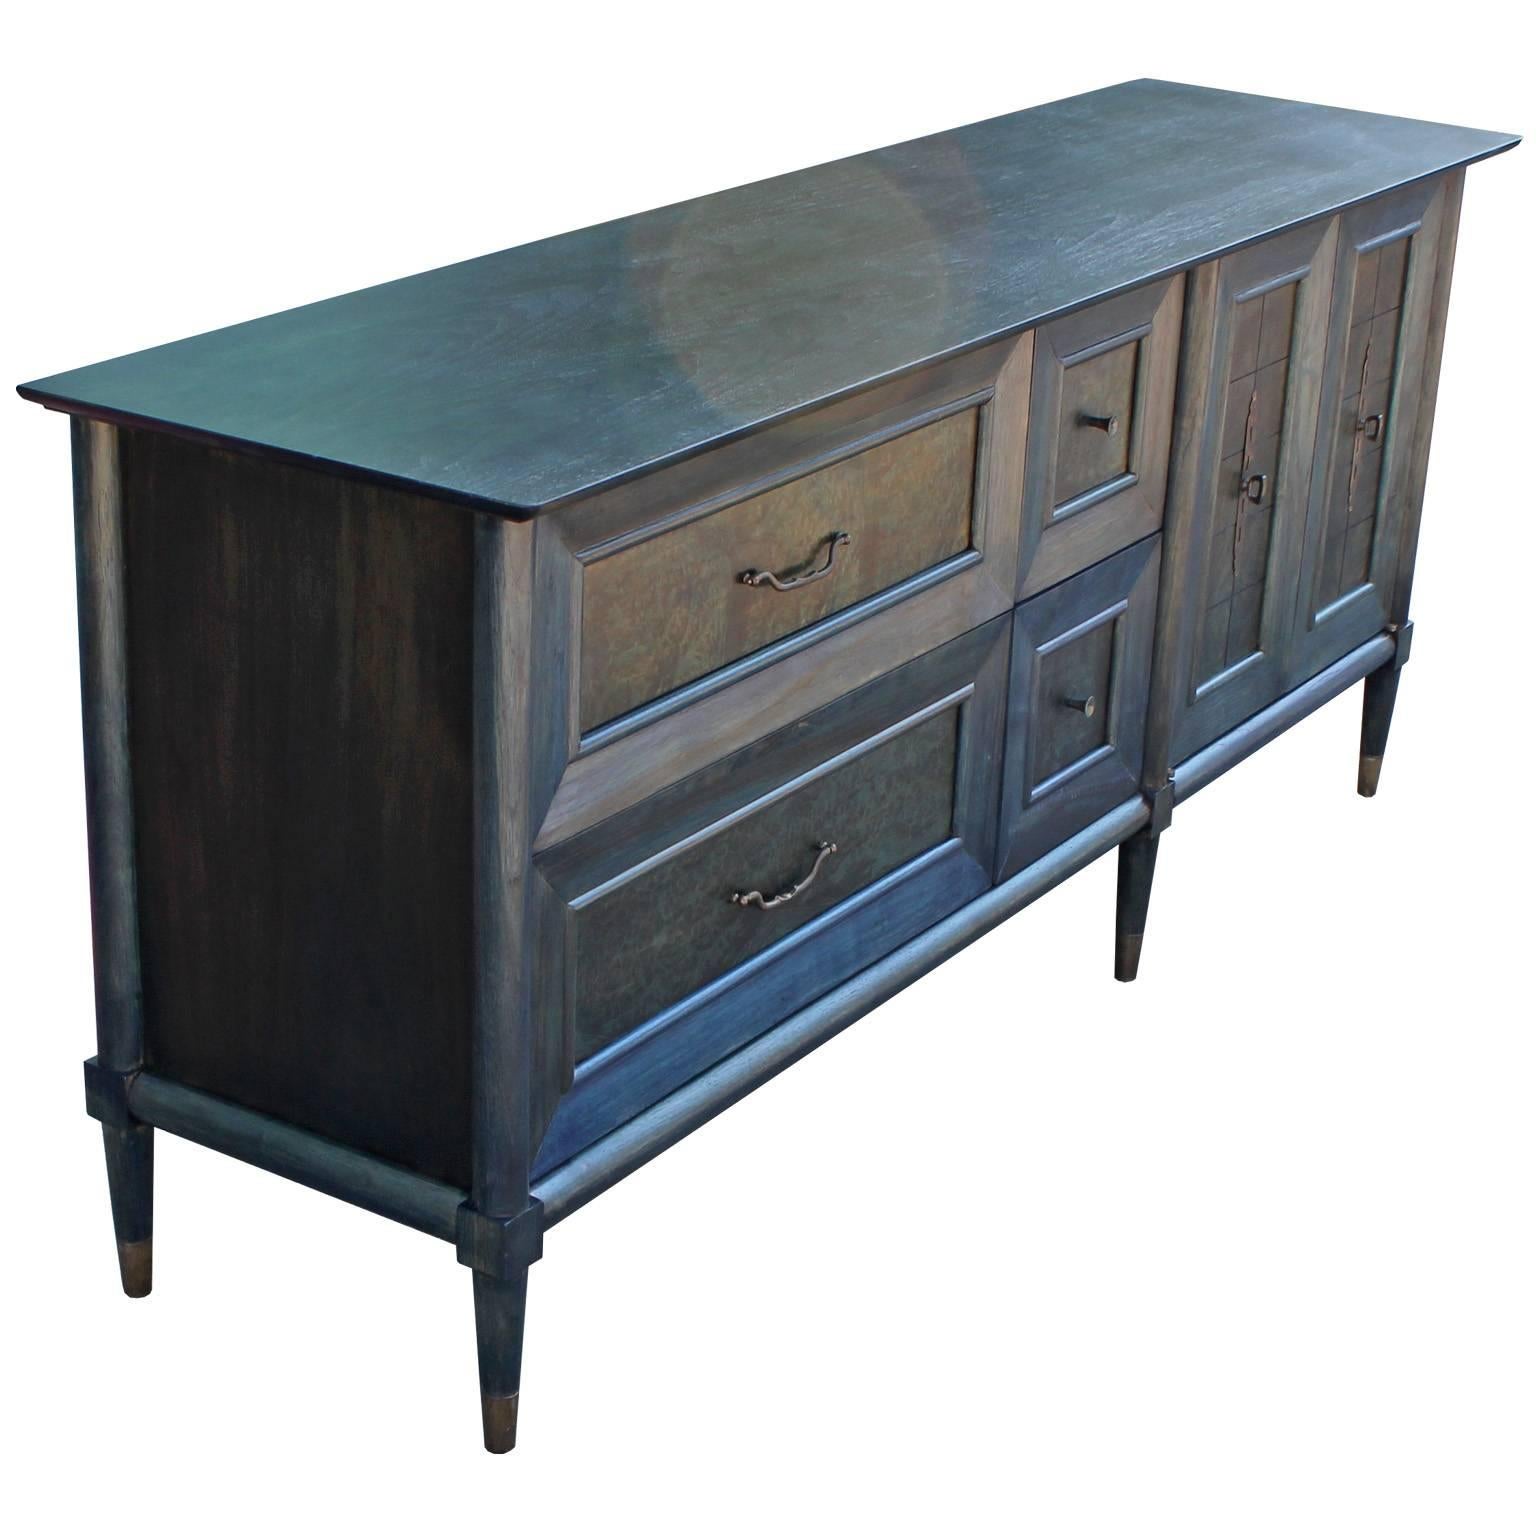 Glamorous Hollywood Regency style sideboard or credenza. Burl wood sideboard is freshly finished in a denim blue aniline dye. Copper hardware has a wonderful patina. Sideboard has excellent lines and sophisticated detailing. Four drawers and an open